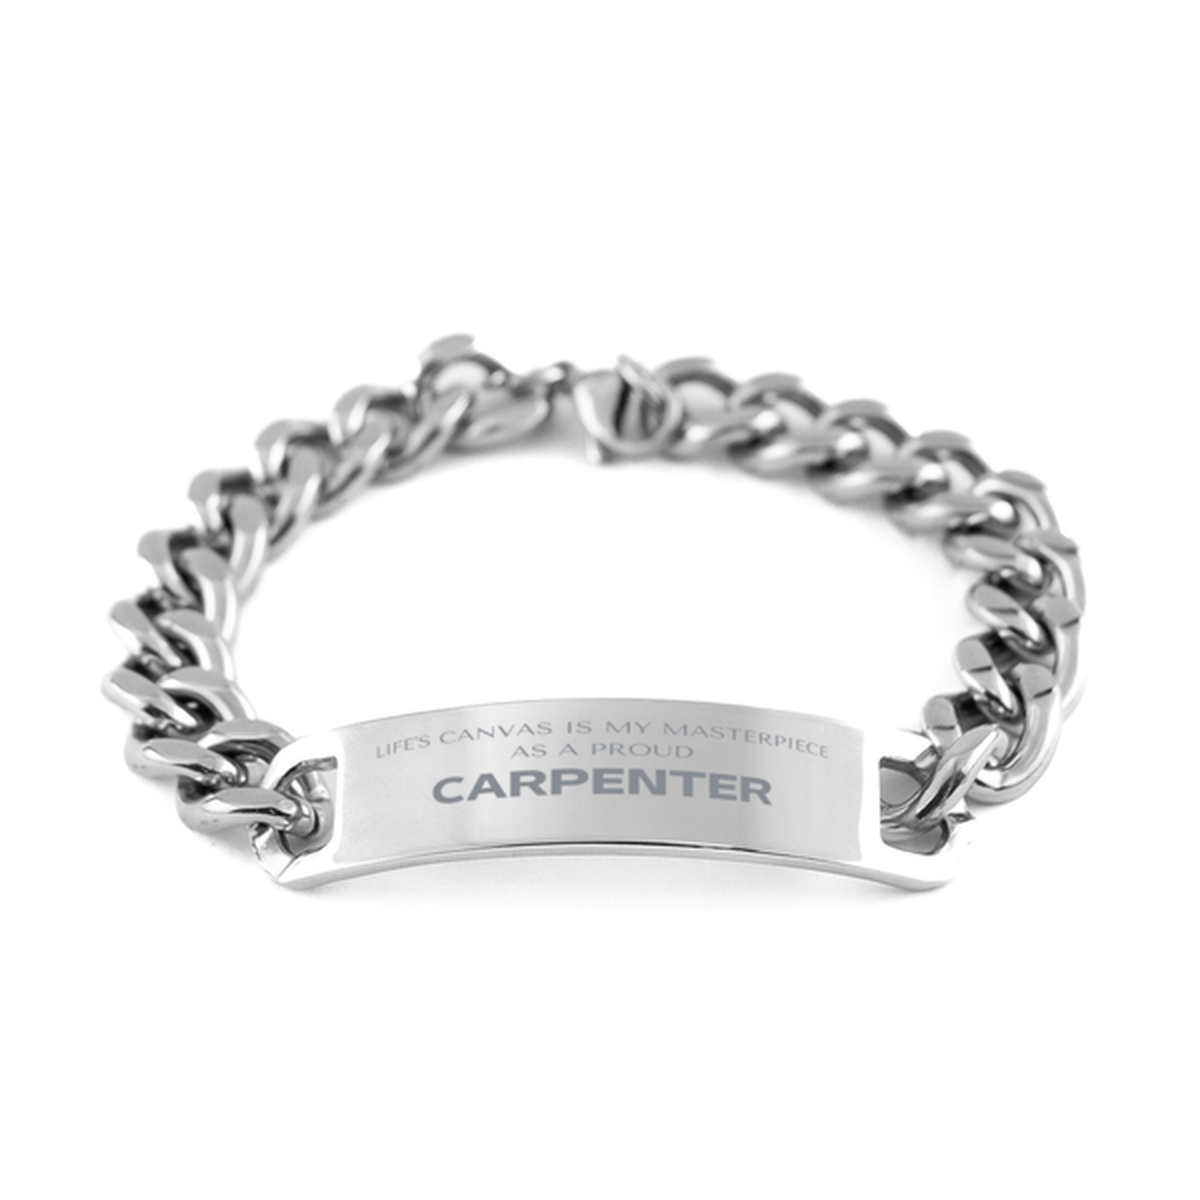 Proud Carpenter Gifts, Life's canvas is my masterpiece, Epic Birthday Christmas Unique Cuban Chain Stainless Steel Bracelet For Carpenter, Coworkers, Men, Women, Friends